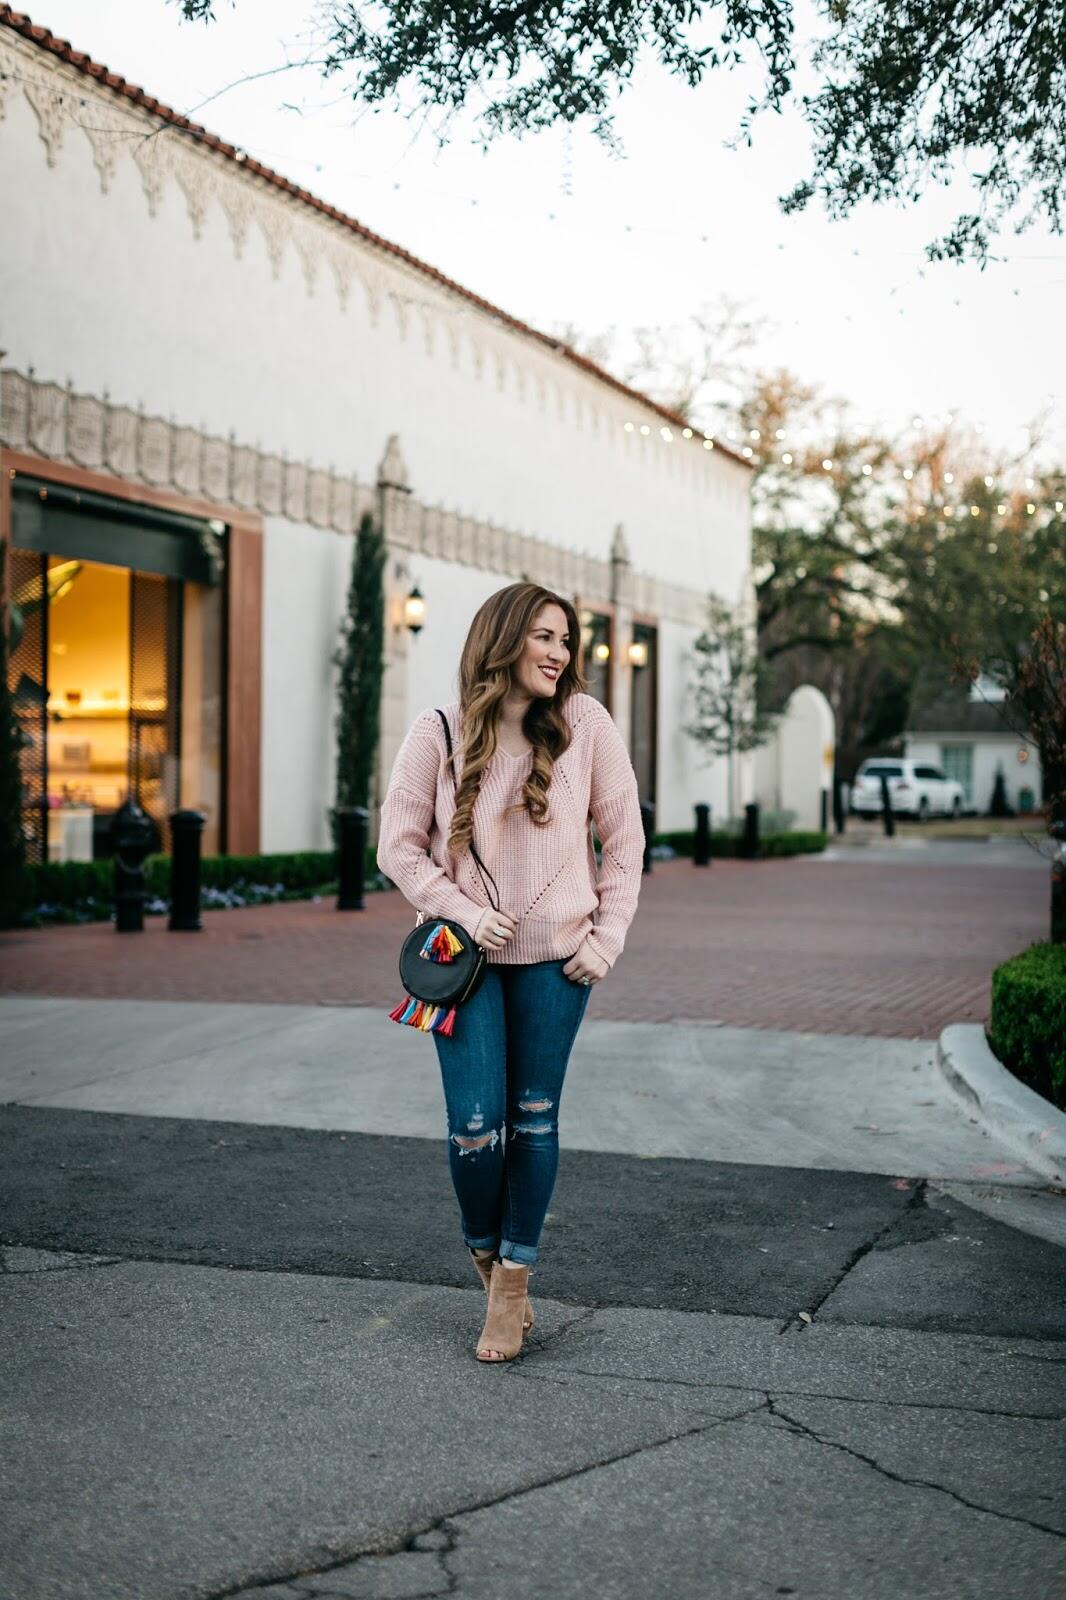 The Perfect Budget Friendly Lightweight Sweater to Transition from Winter to Spring by Walking in Memphis in High Heels